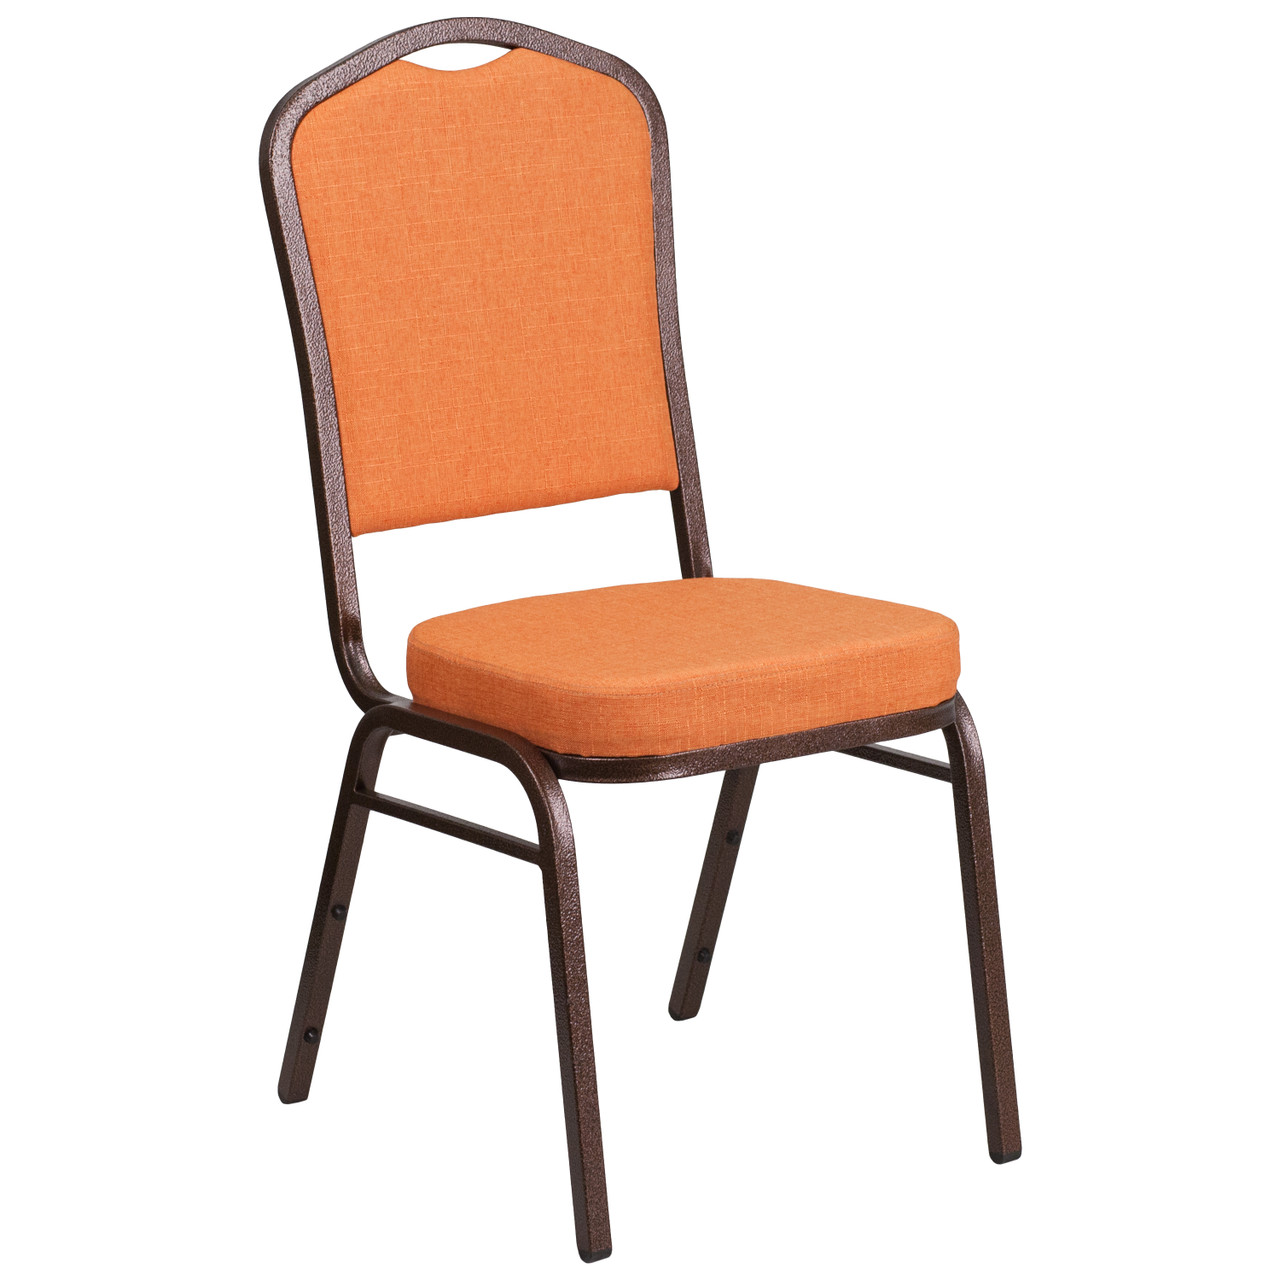 Banquet Chairs Orange Fabric Stackable Chairs